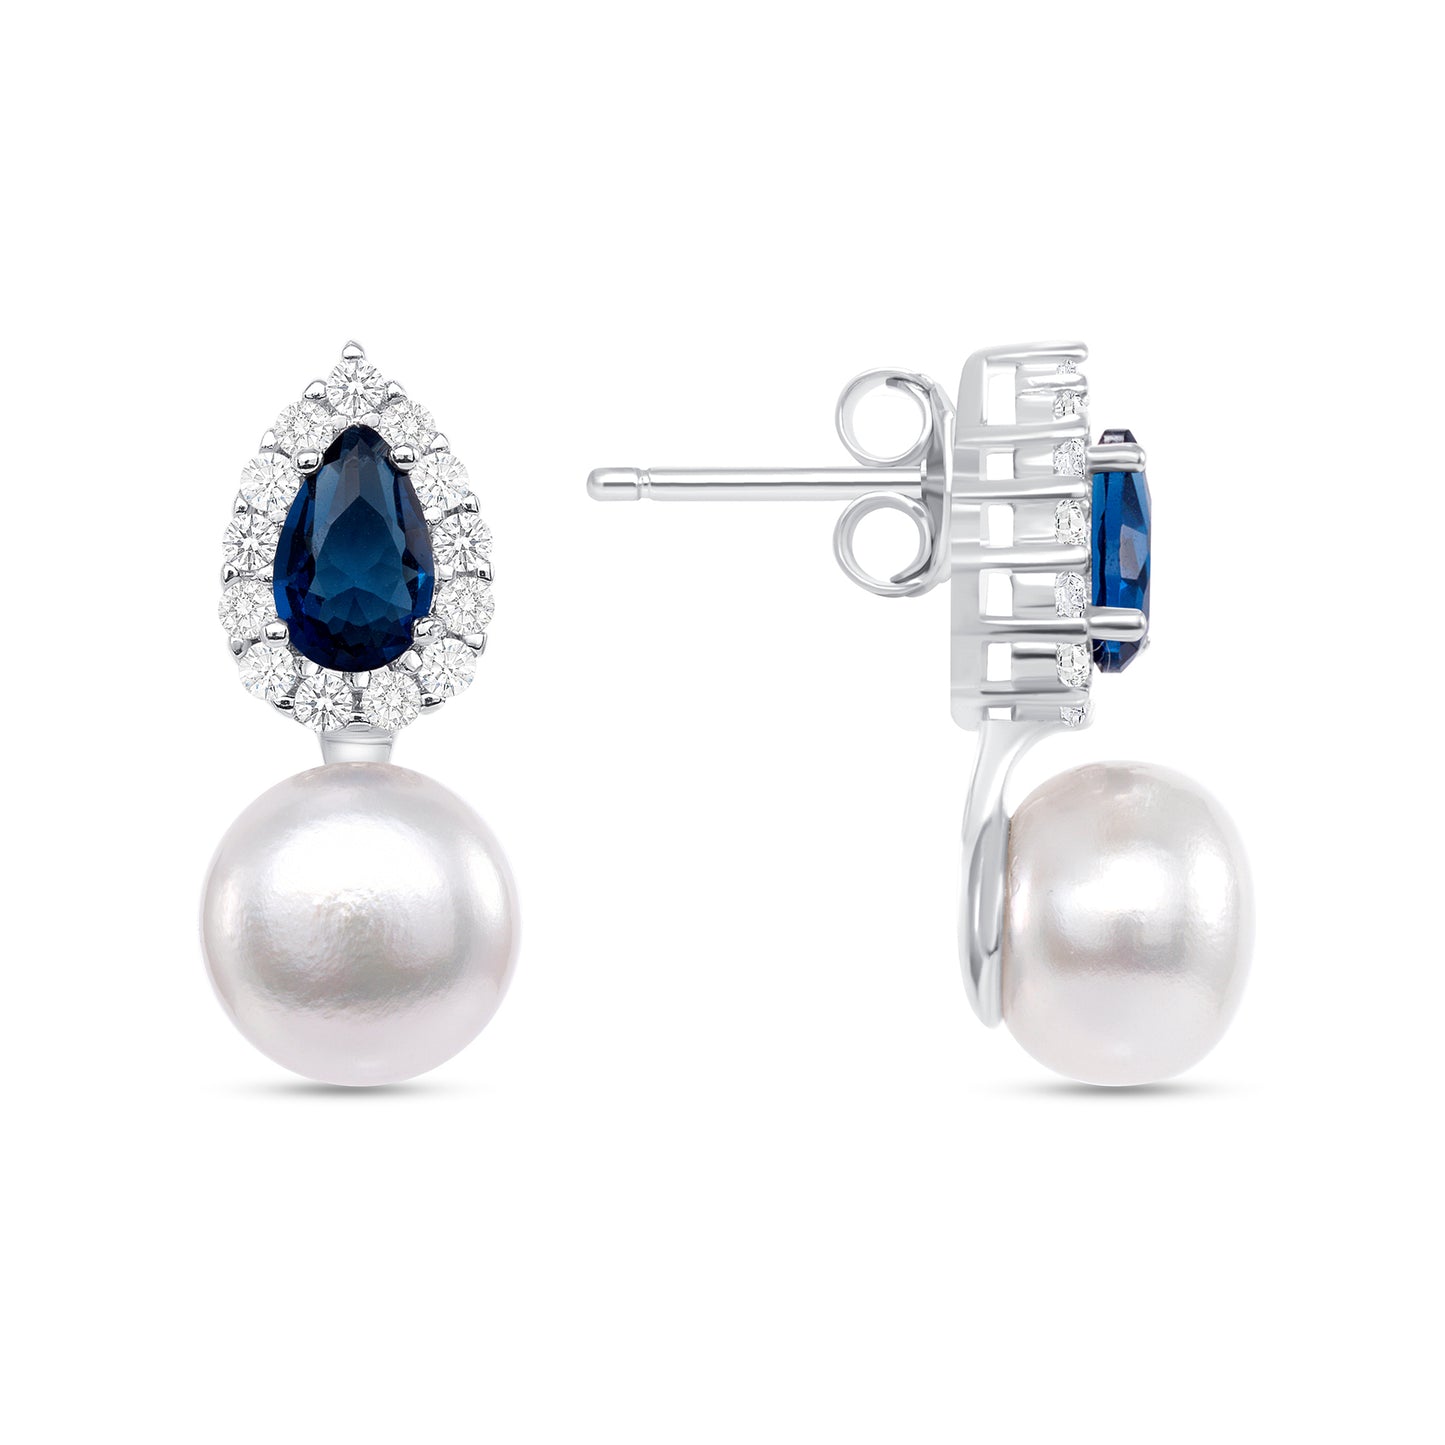 Silver 925 Rhodium Plated Pear Shape Blue Cubic Zirconia w/ White Pearl Earring. GE4313BLUE